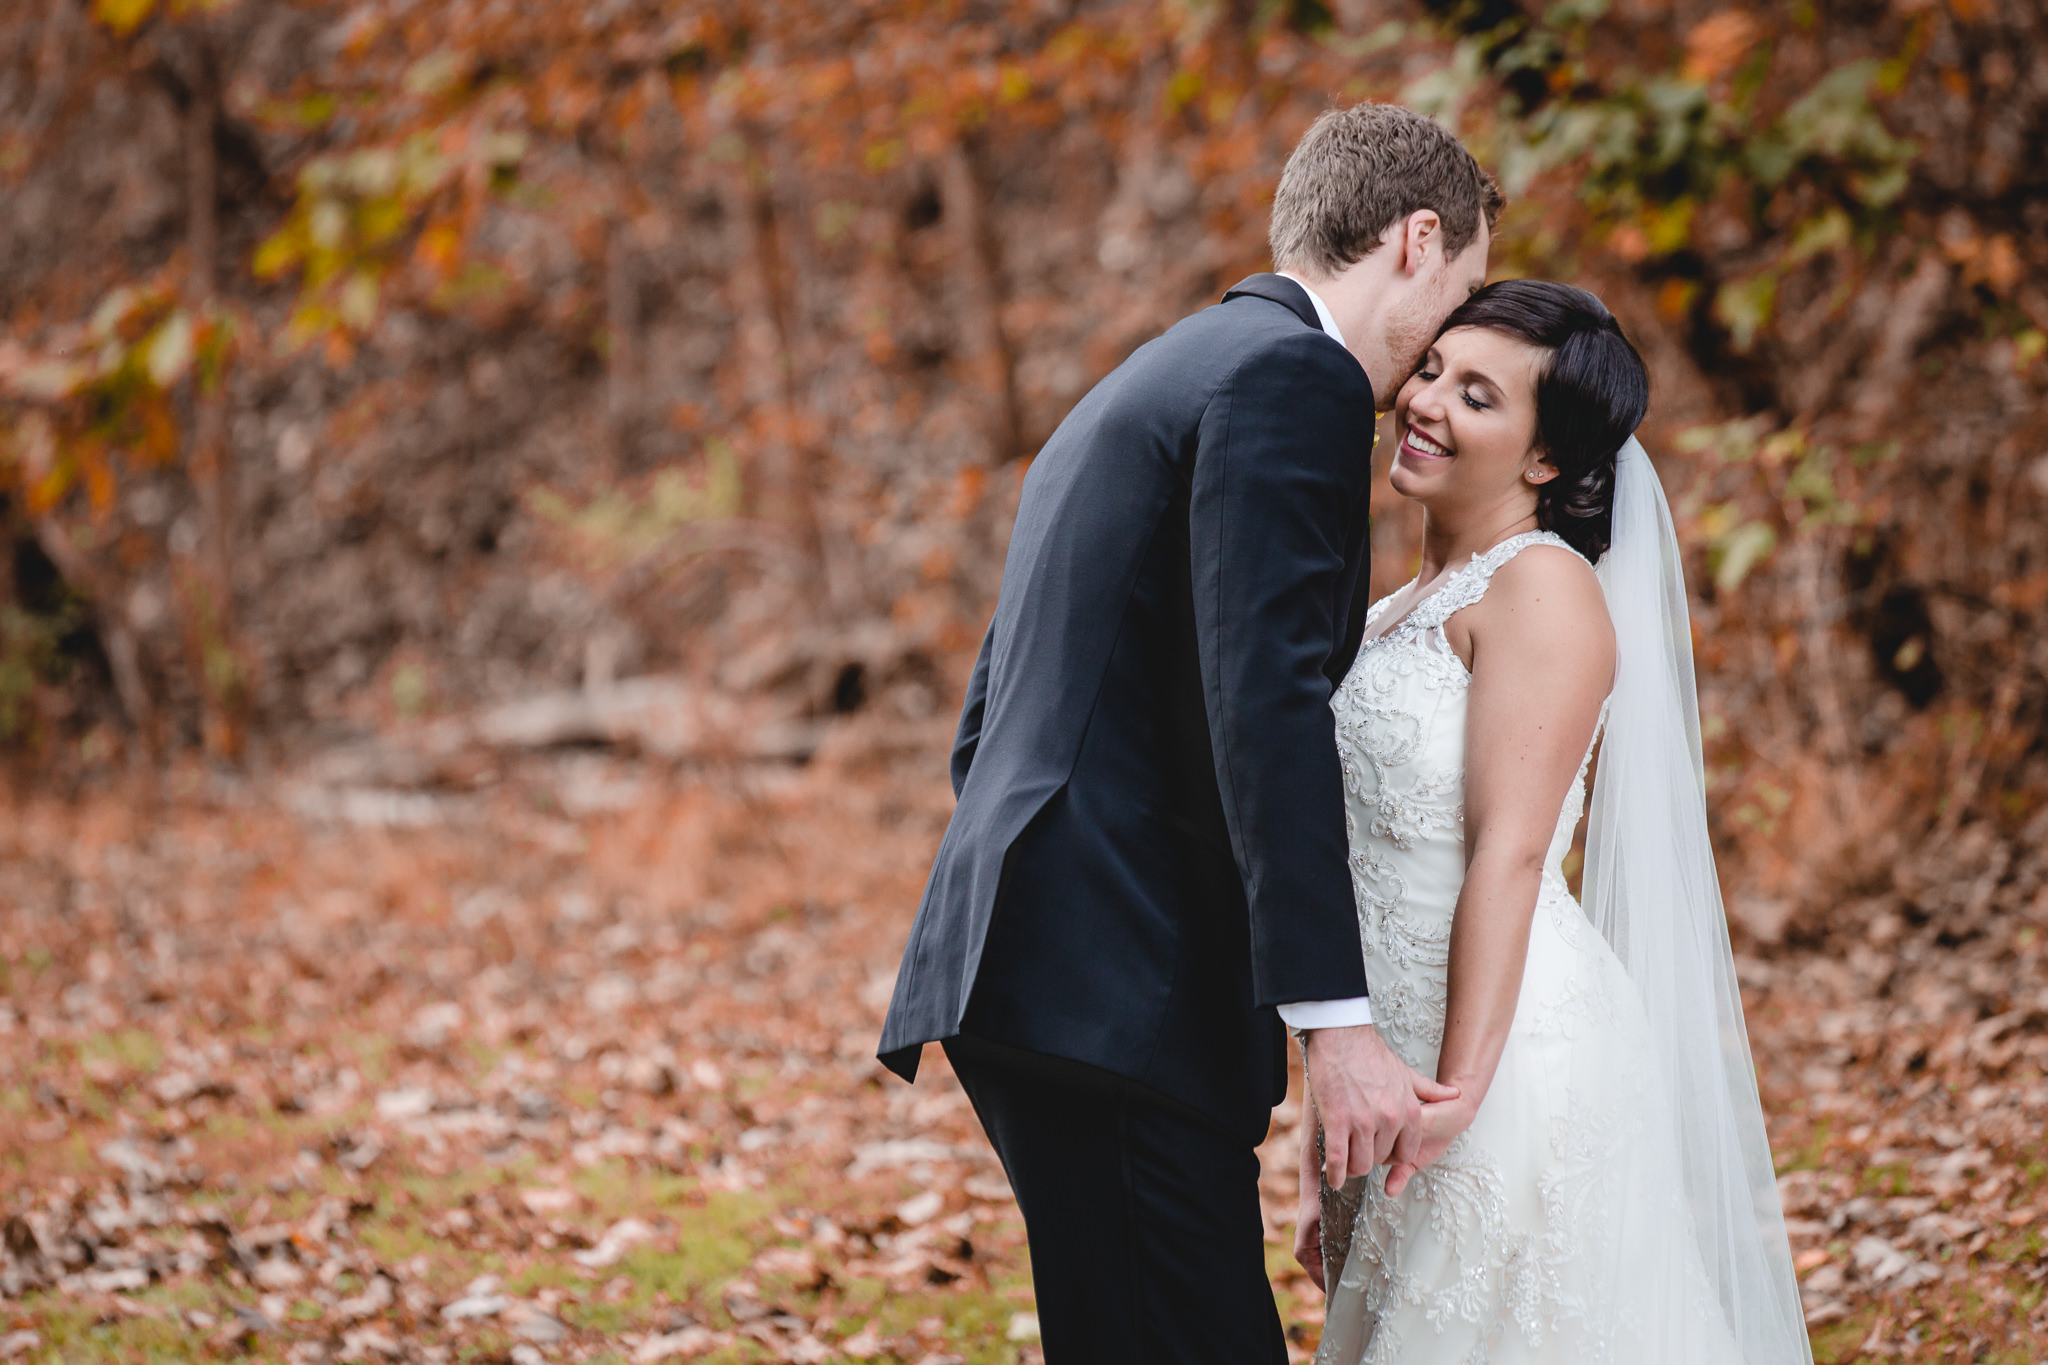 Groom makes his bride laugh in fall foliage before their DoubleTree Pittsburgh Airport wedding reception